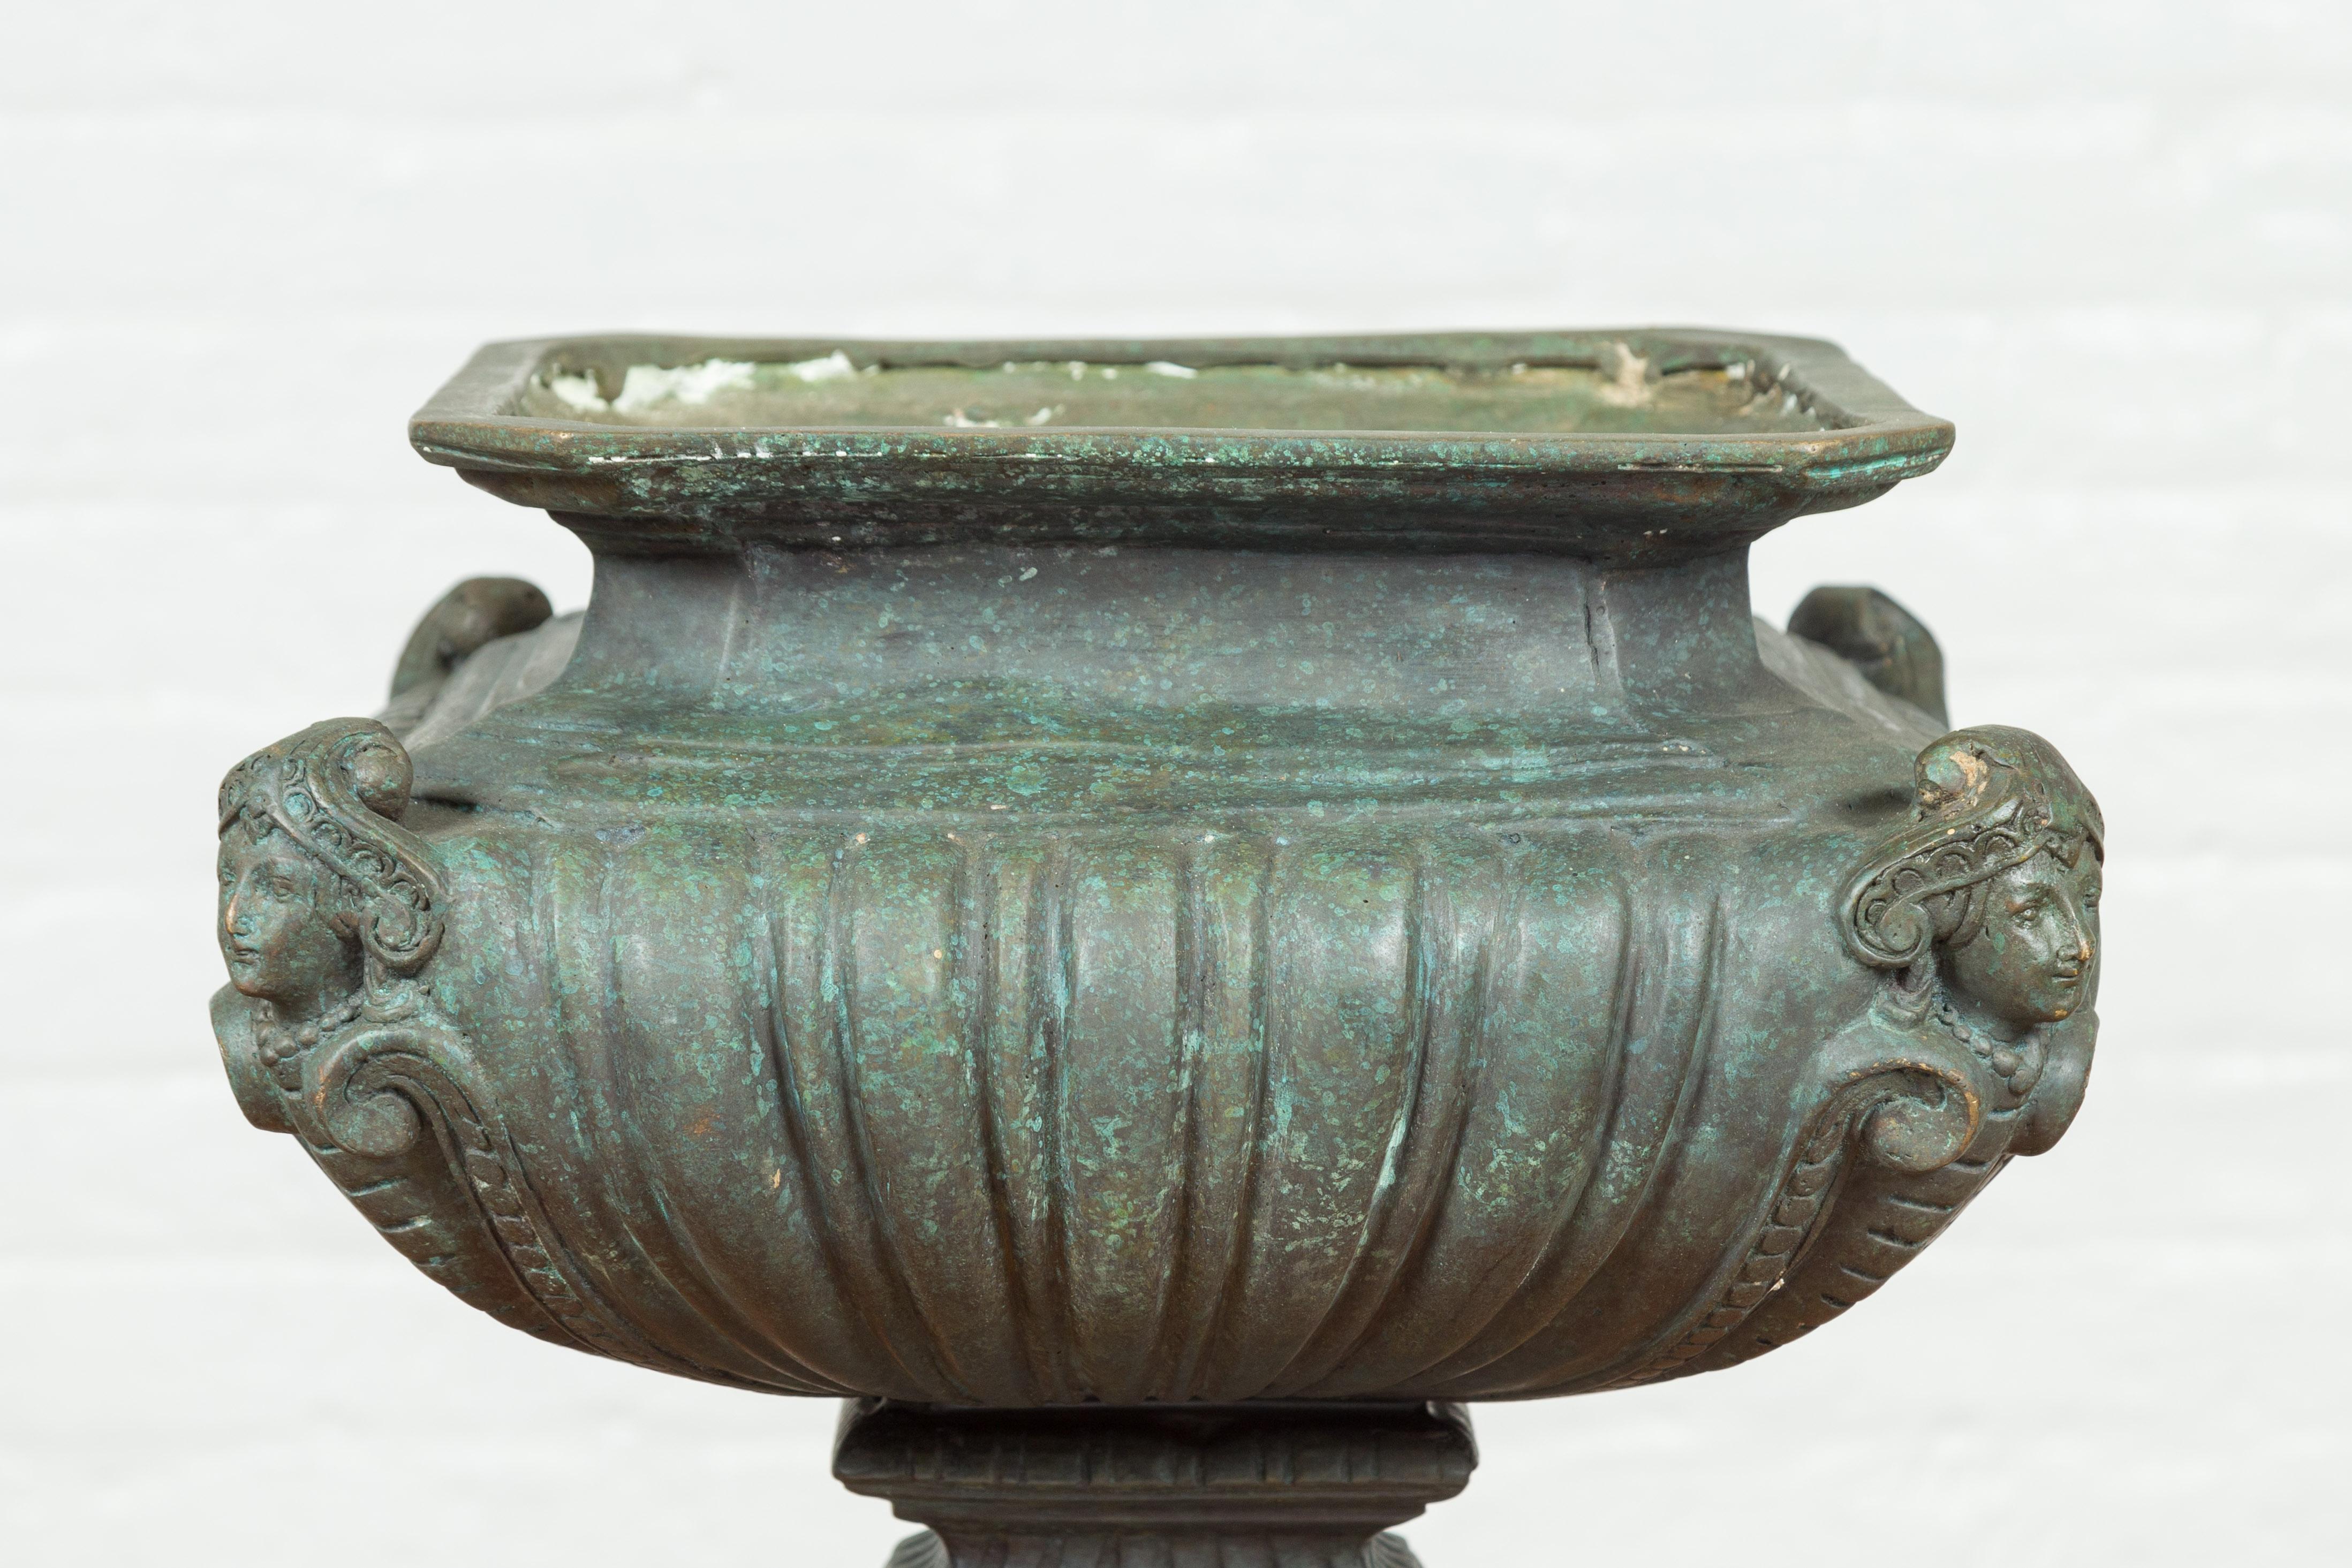 Contemporary Cast Bronze Planter with Figures, Gadroon Motifs and Verde Patina For Sale 3